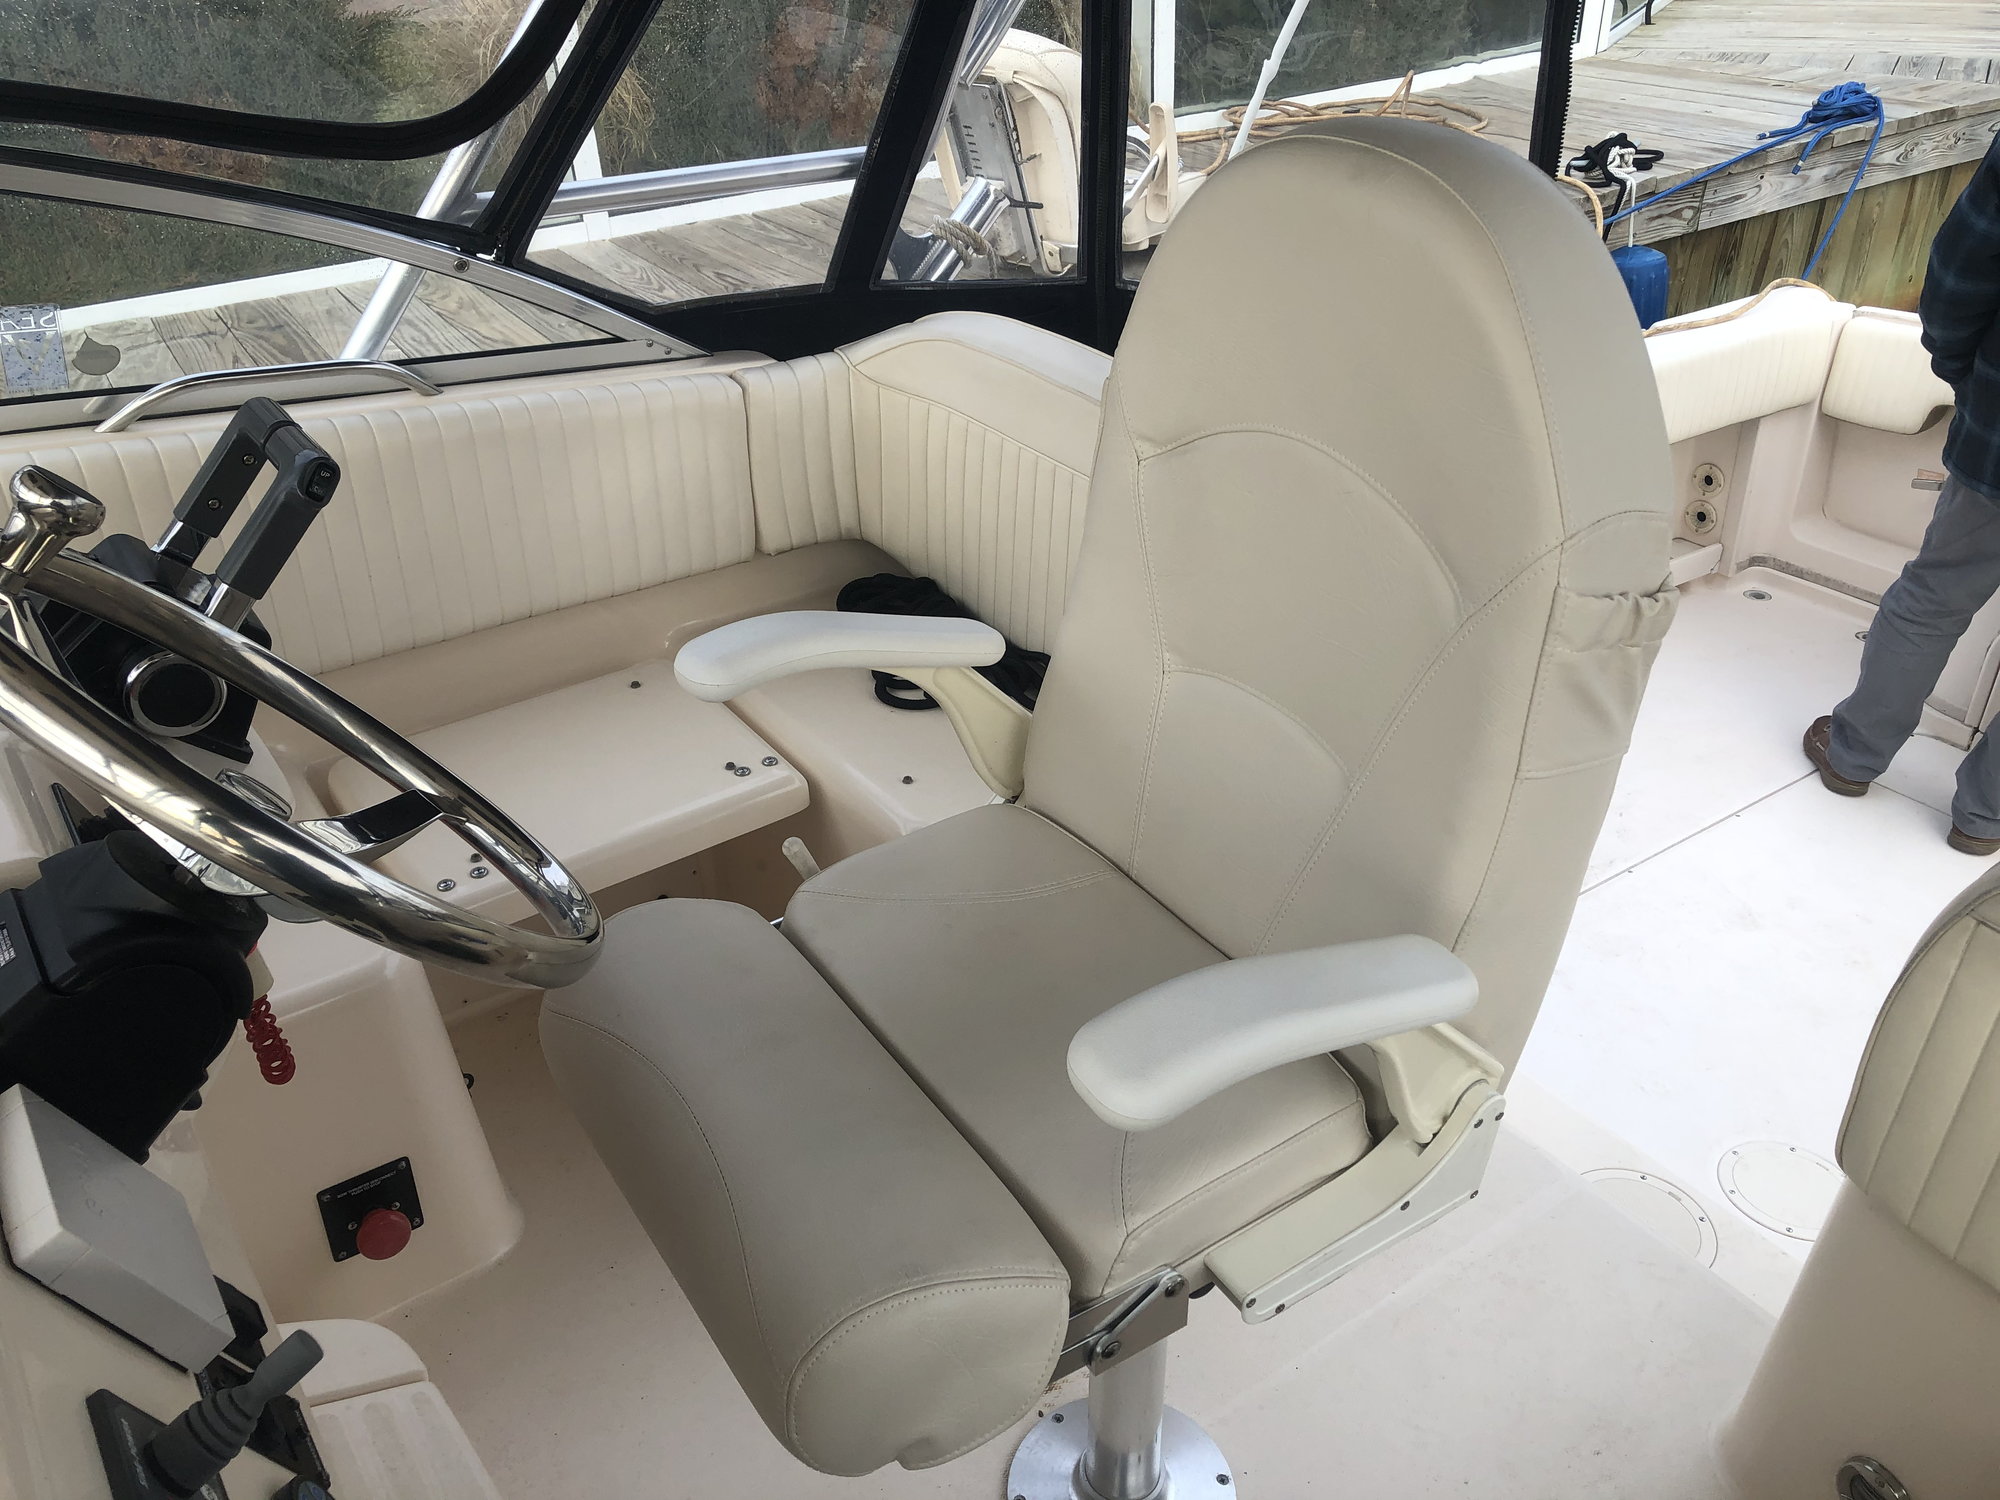 What to Look For In Center-Console Helm Seats